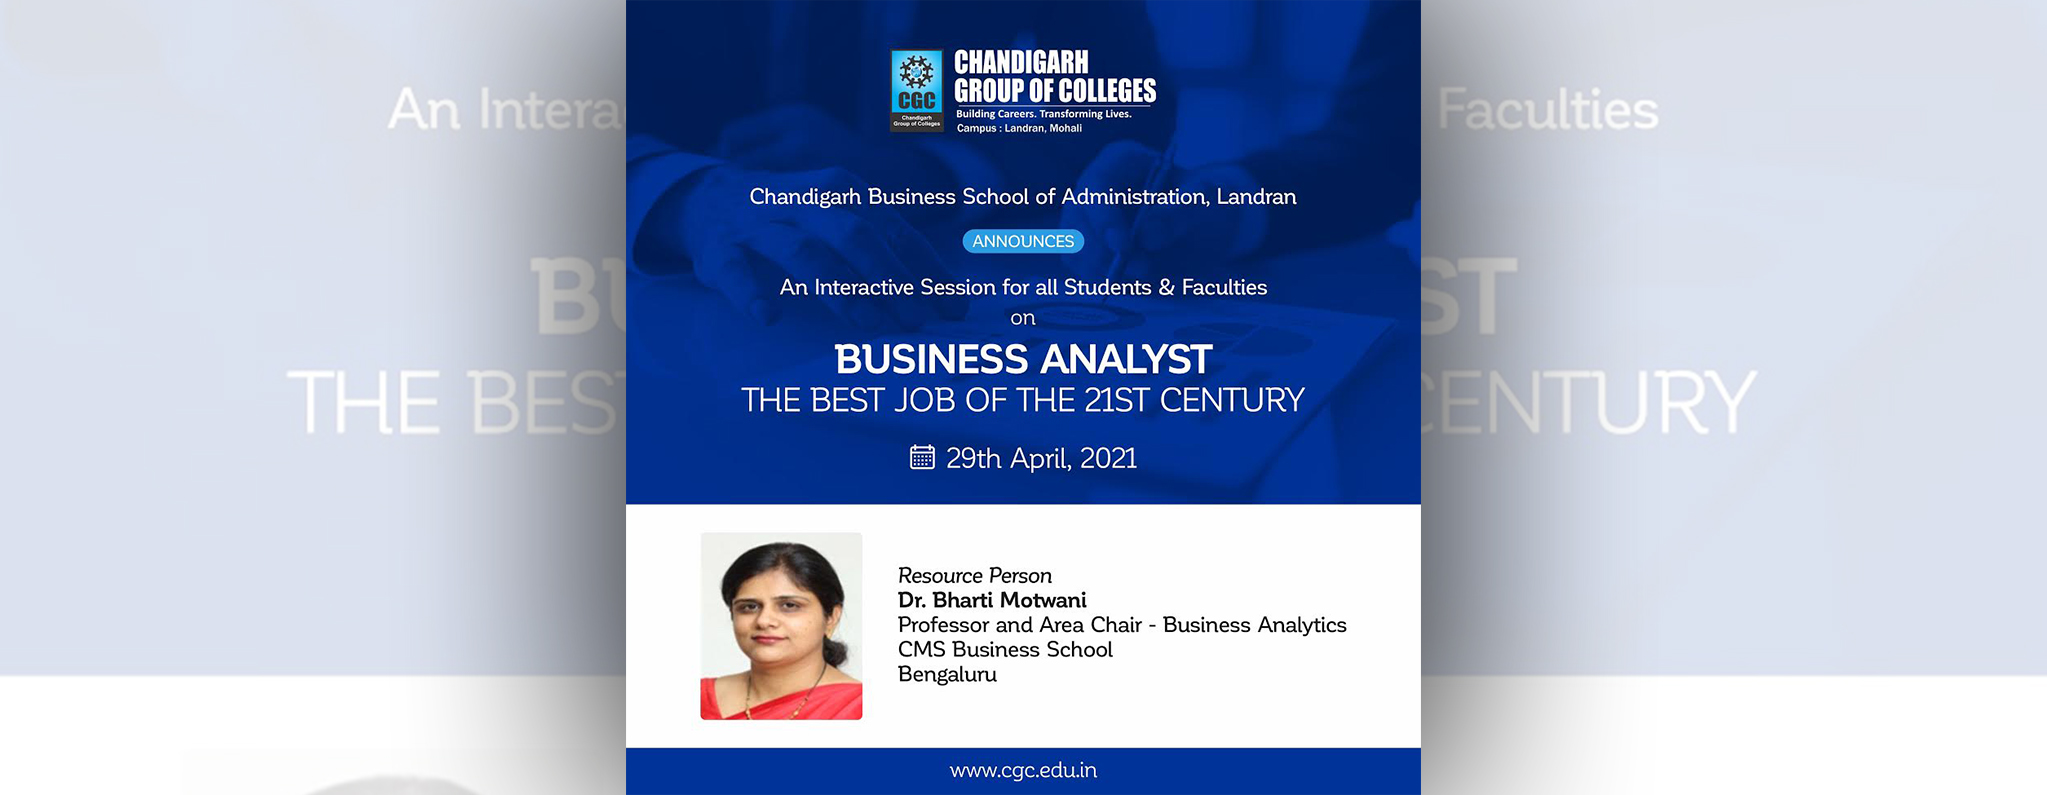 An Interactive Session for all Students and Faculties on Business Analyst: The Best Job of 21st Century 